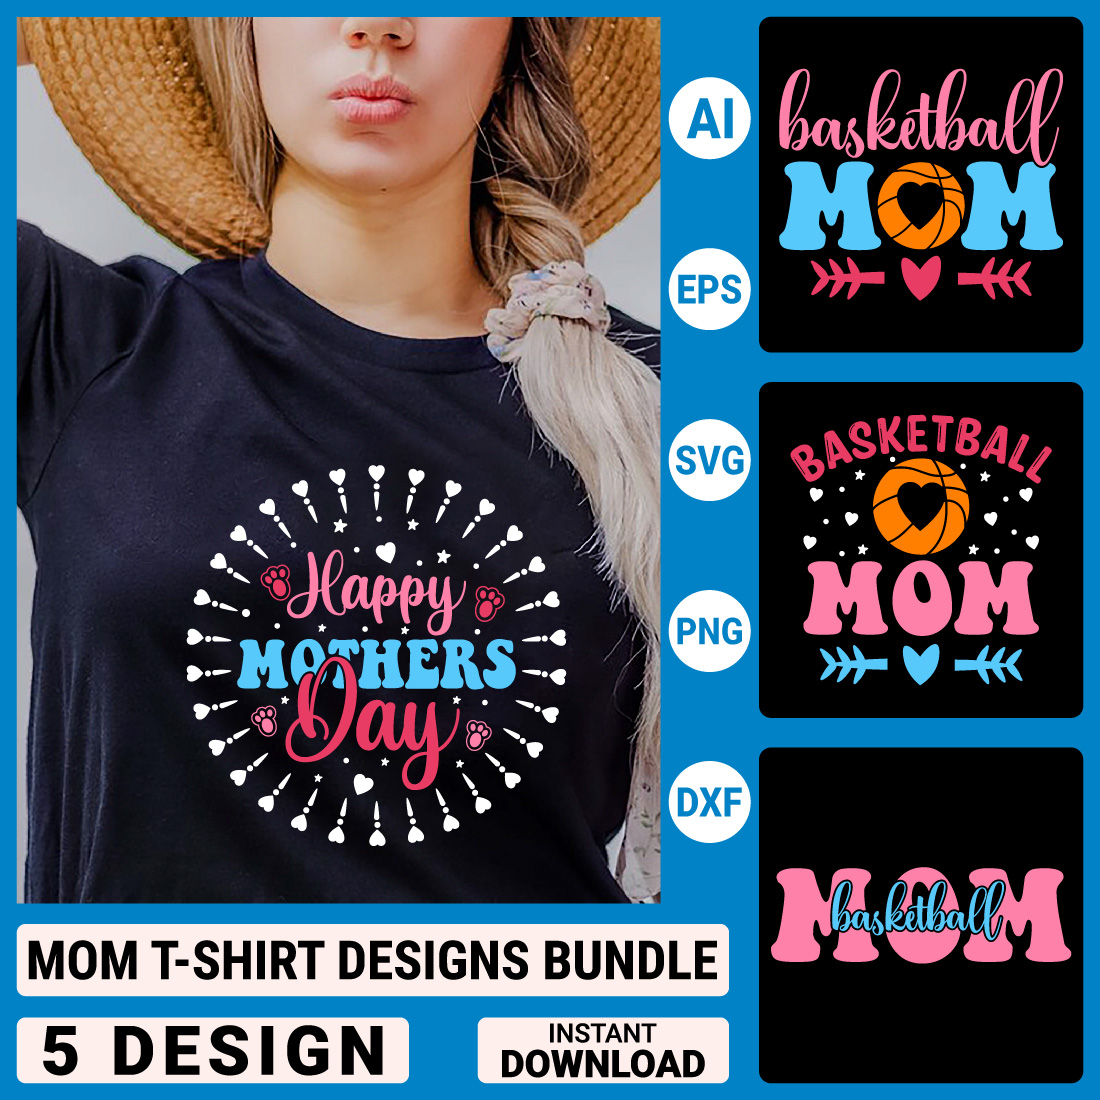 basketball quotes for girls t shirts